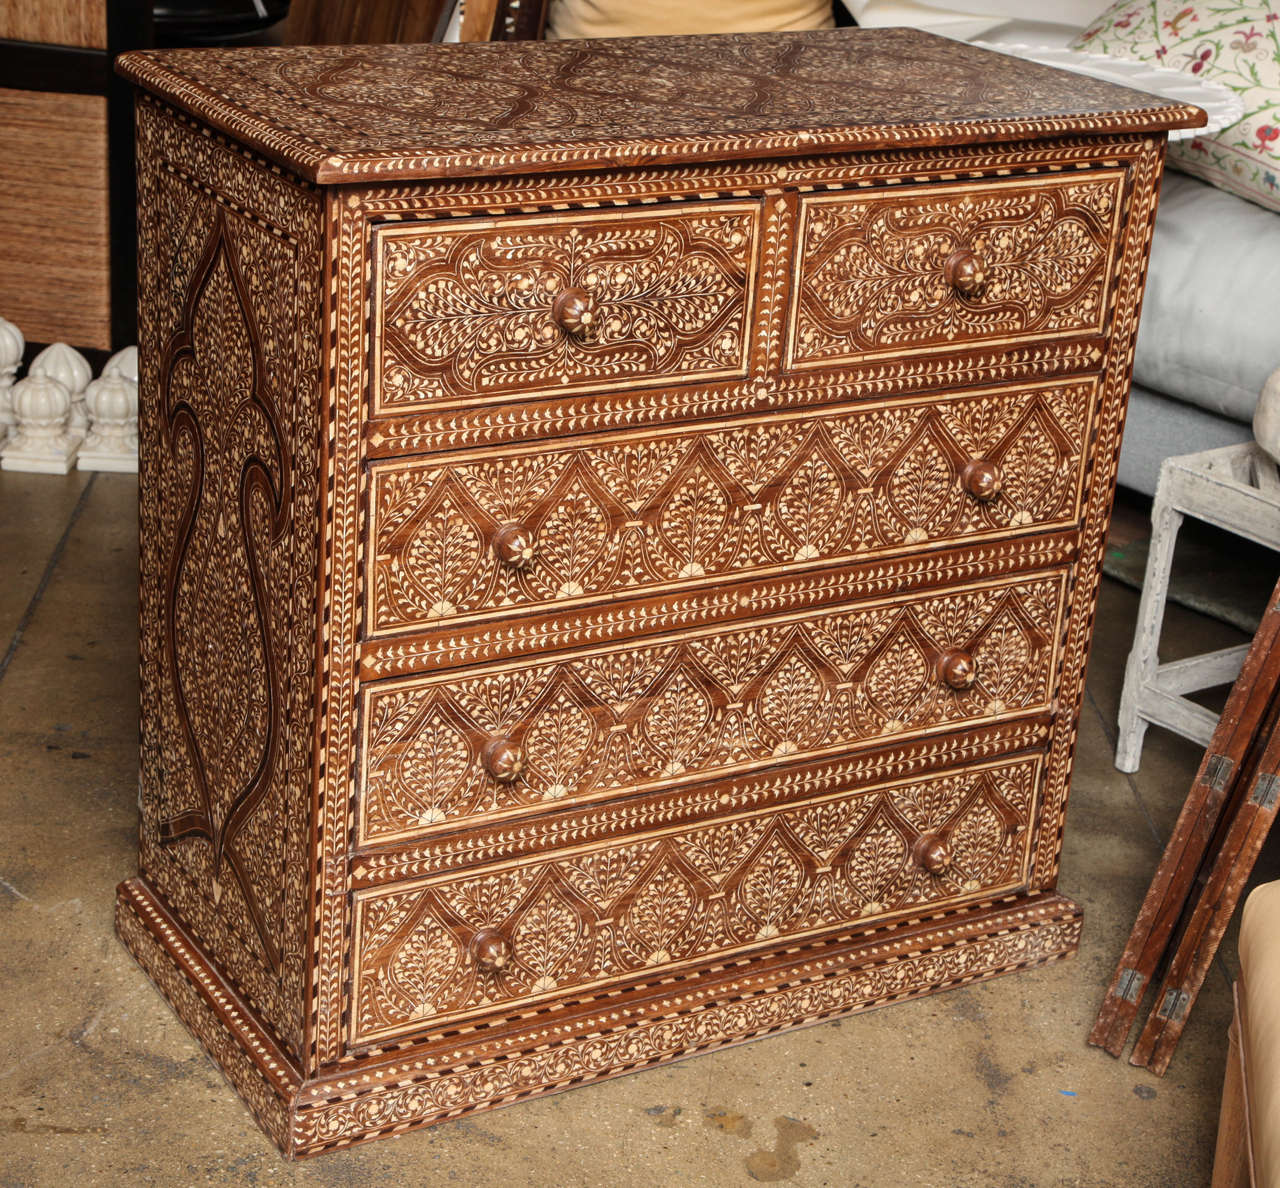 A wood chest of drawers with bone inlays in a classic pattern from India and five drawers.